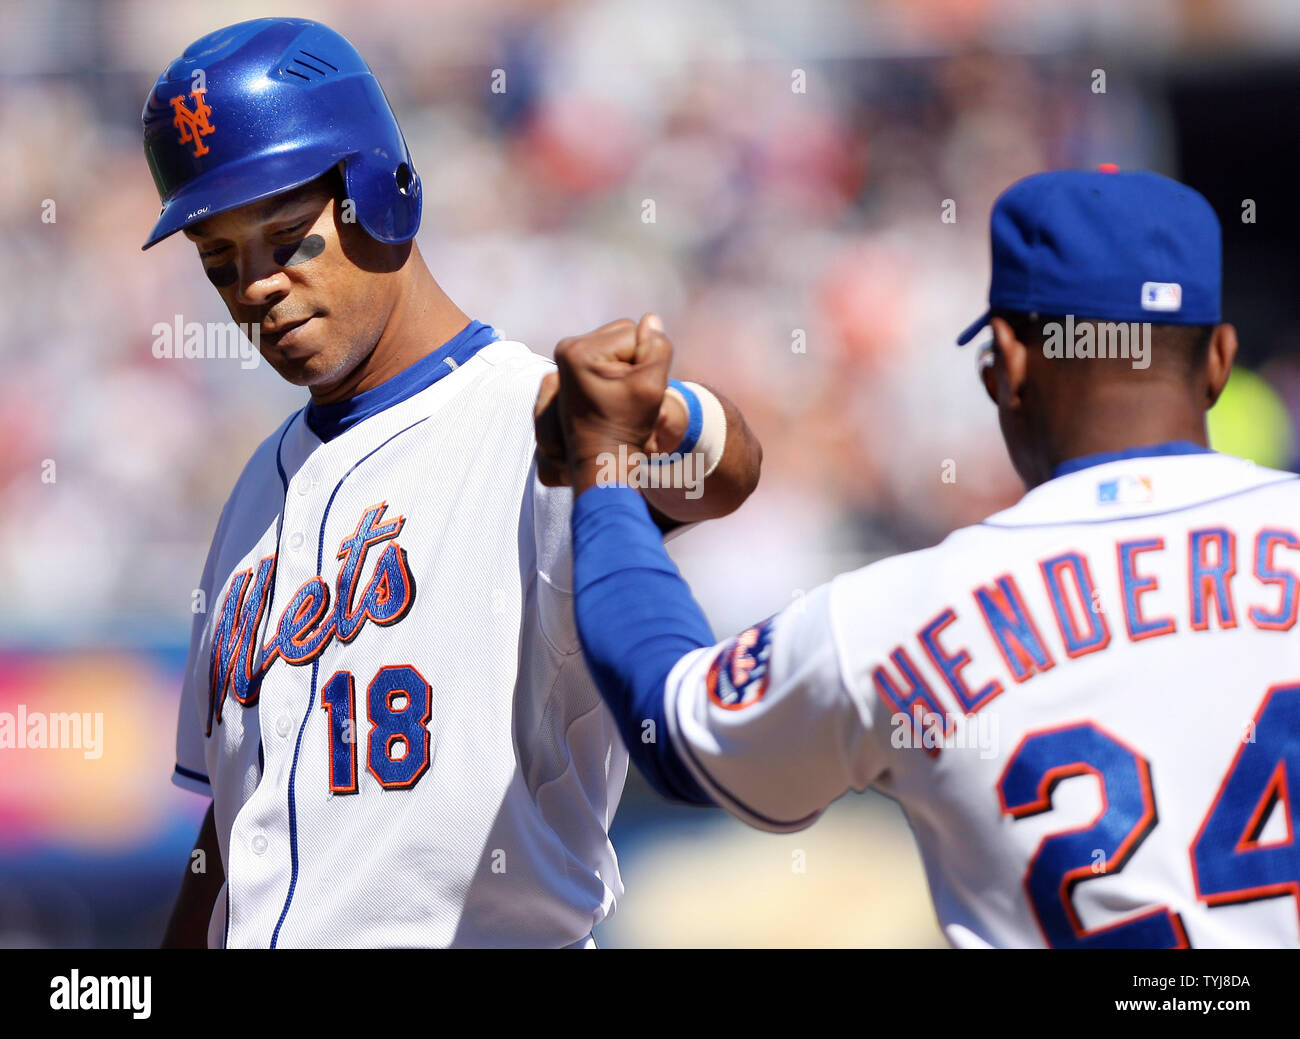 Moises alou hi-res stock photography and images - Alamy